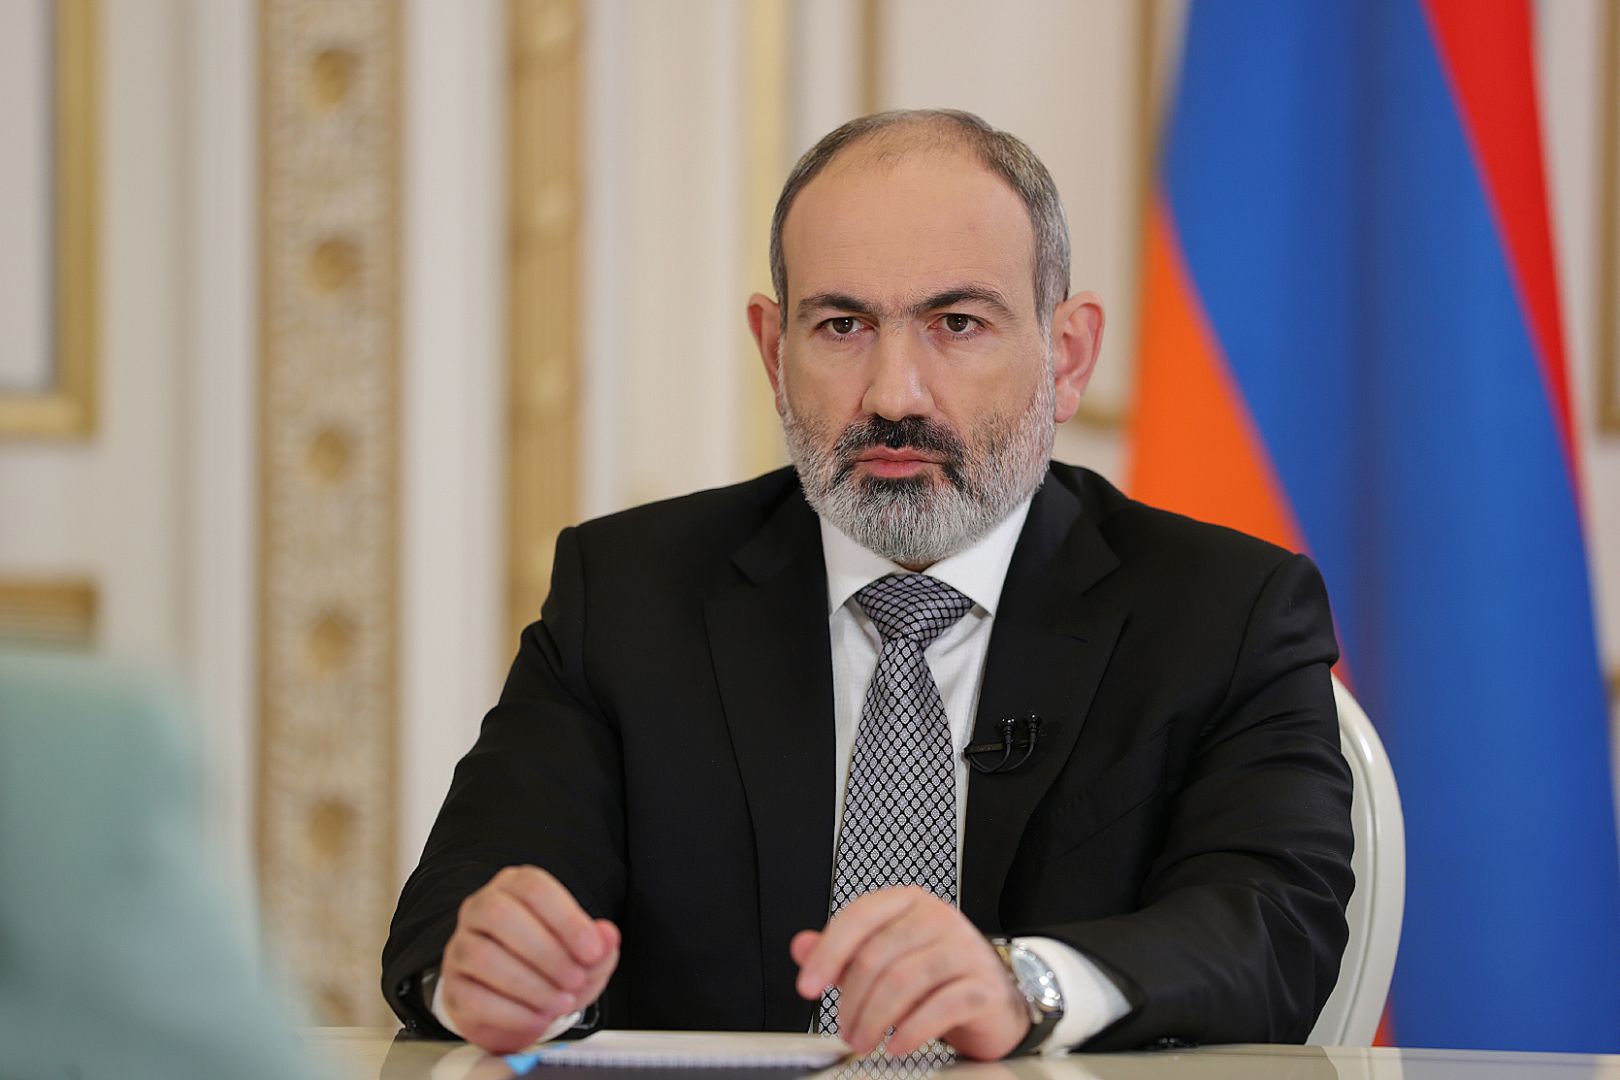 Armenian PM: We do not claim territories outside of our internationally recognized borders